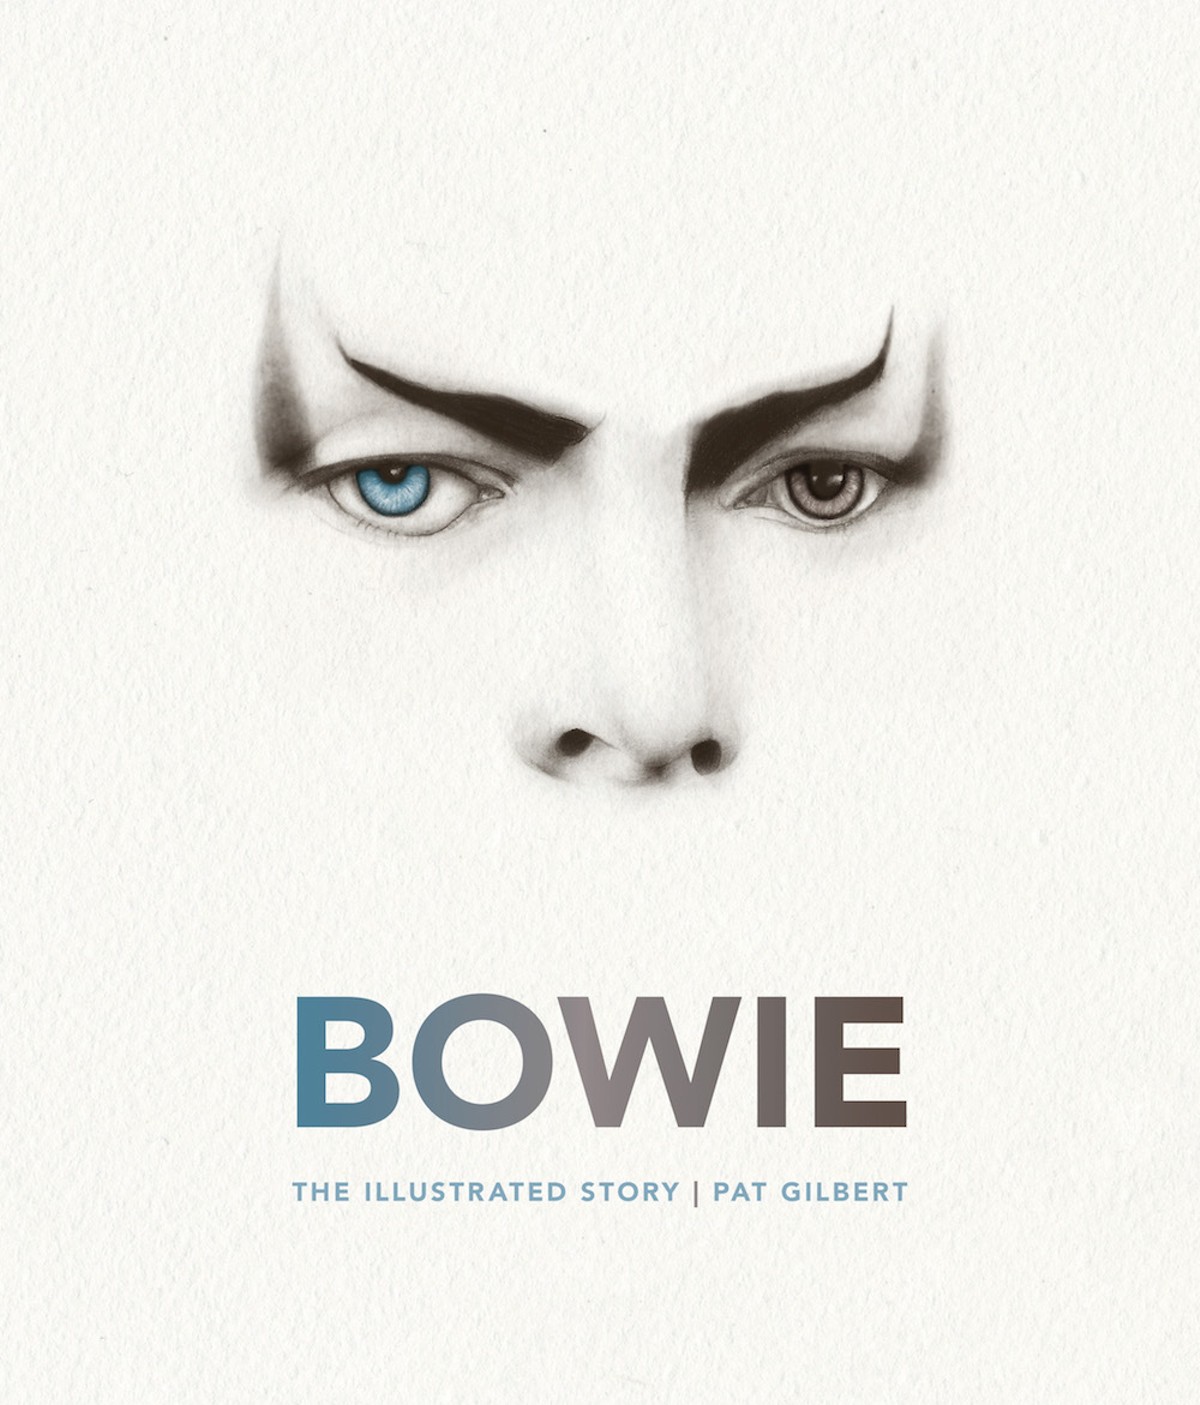 arts_bowie_cover.jpg